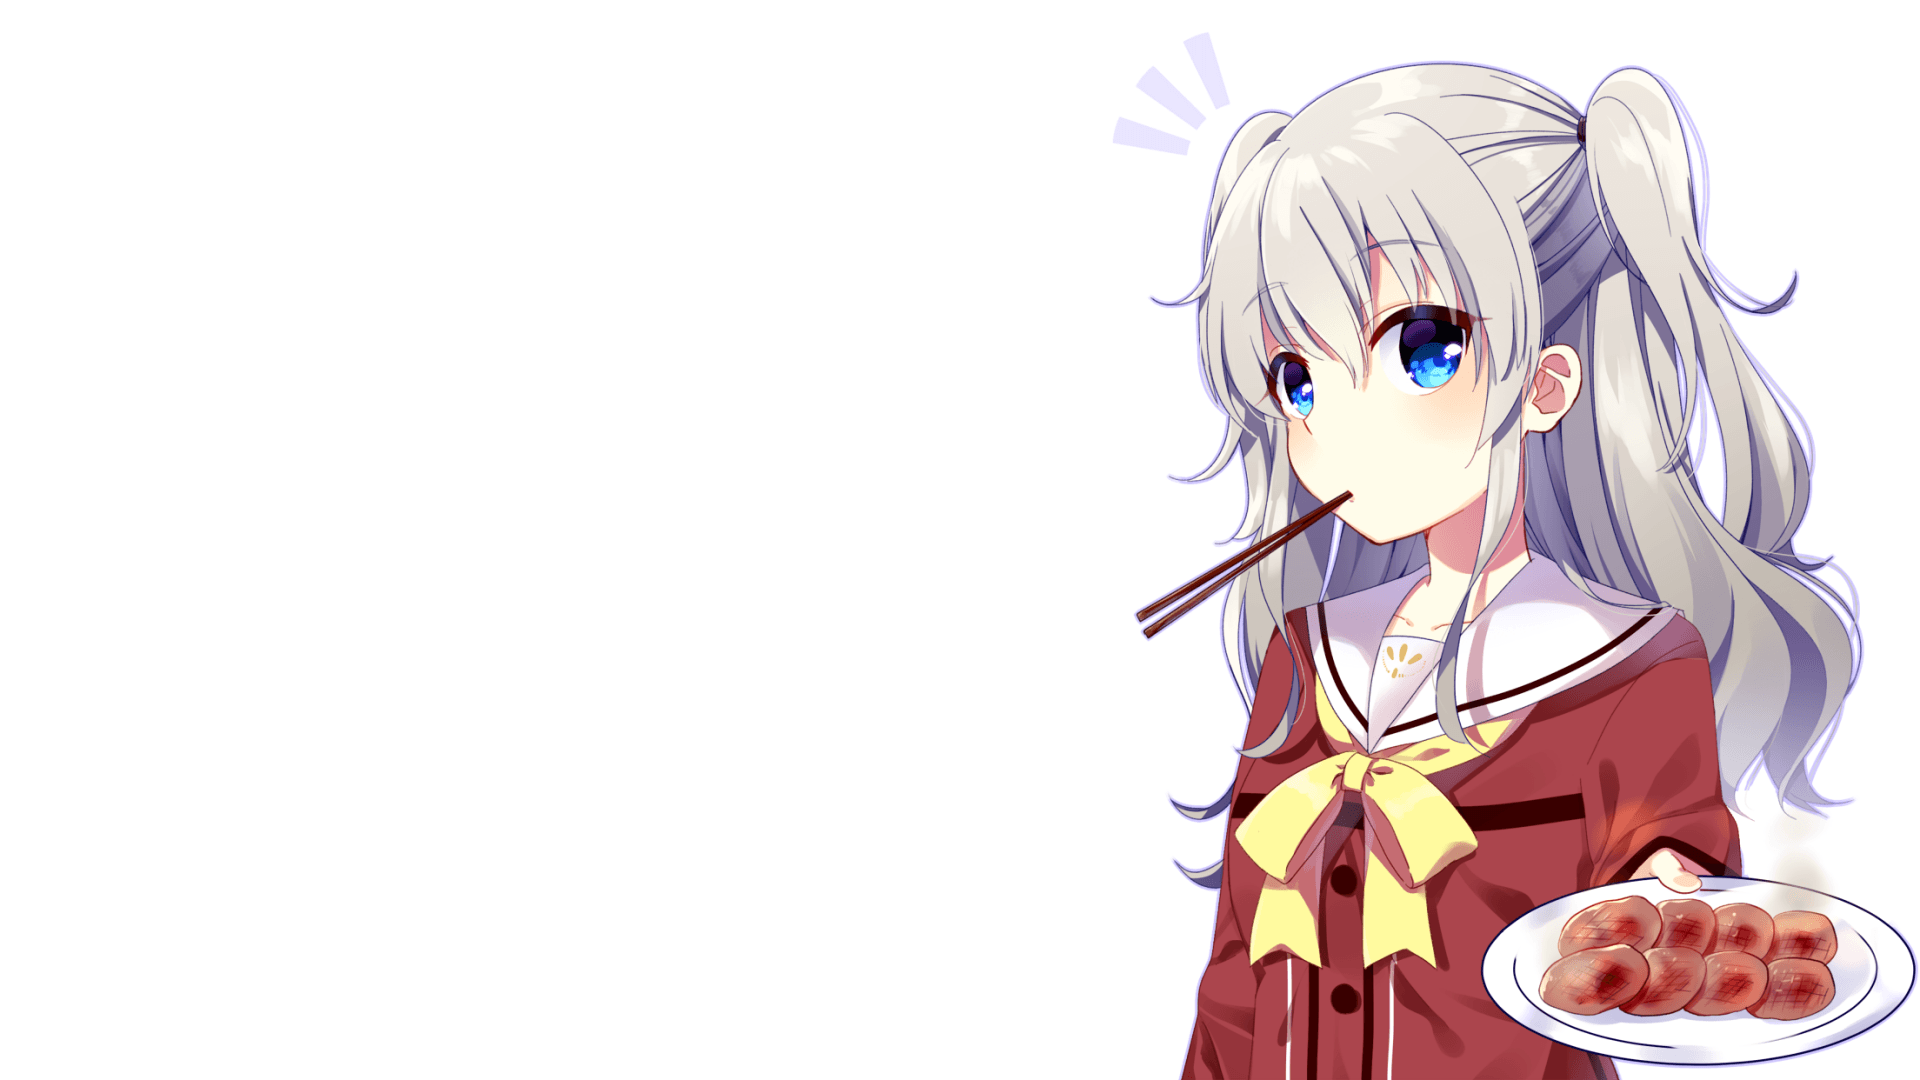 Wallpaper.wiki Anime Charlotte Background PIC WPC0012446